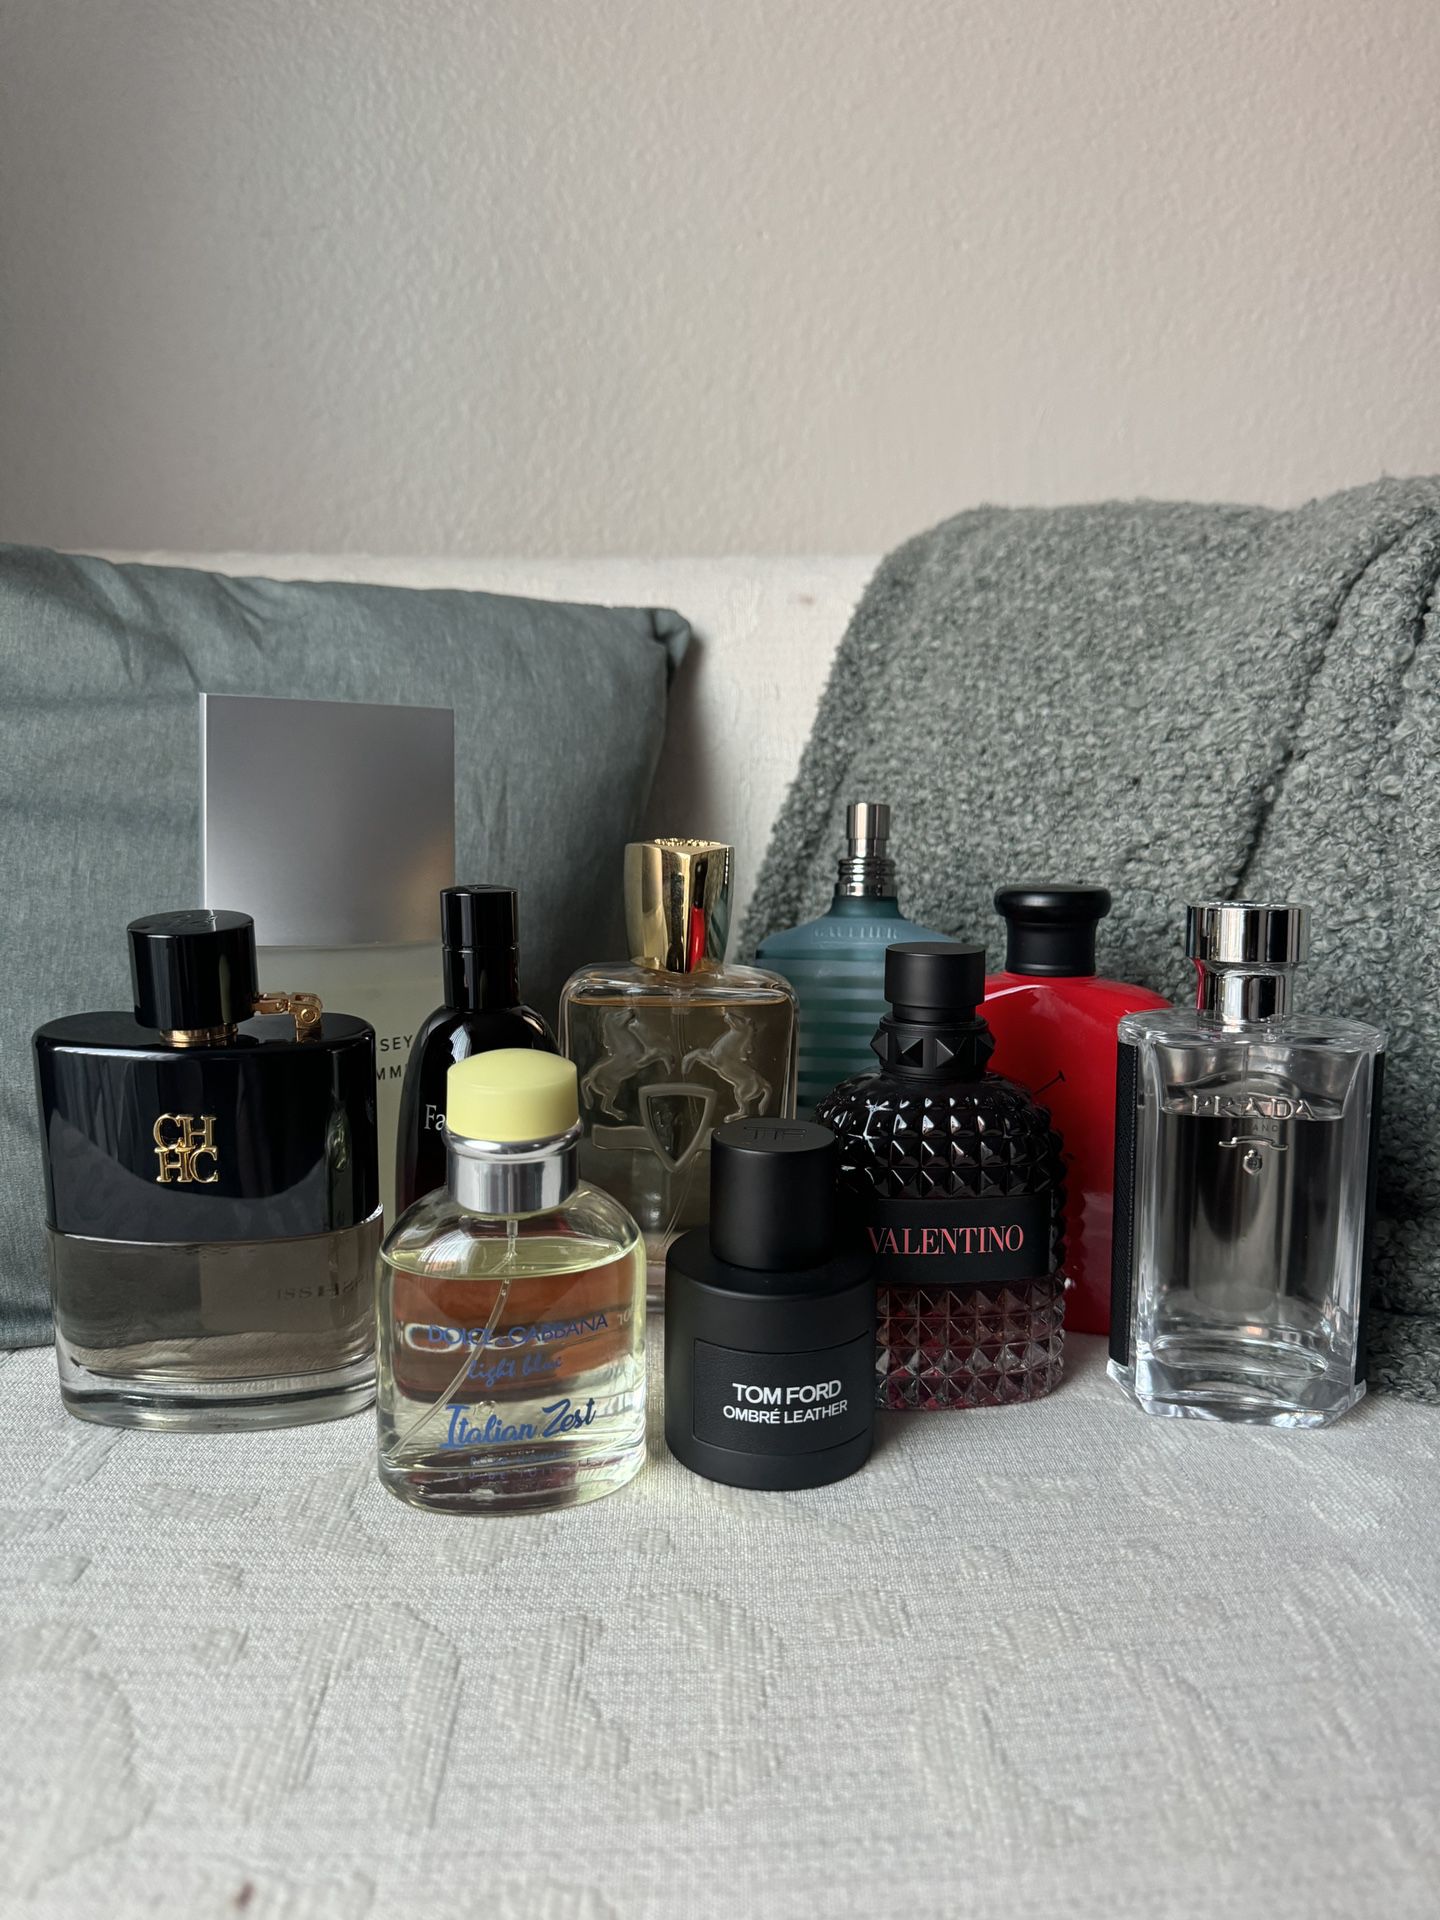 Must Go!! Selling the Last Of My Fragrance 